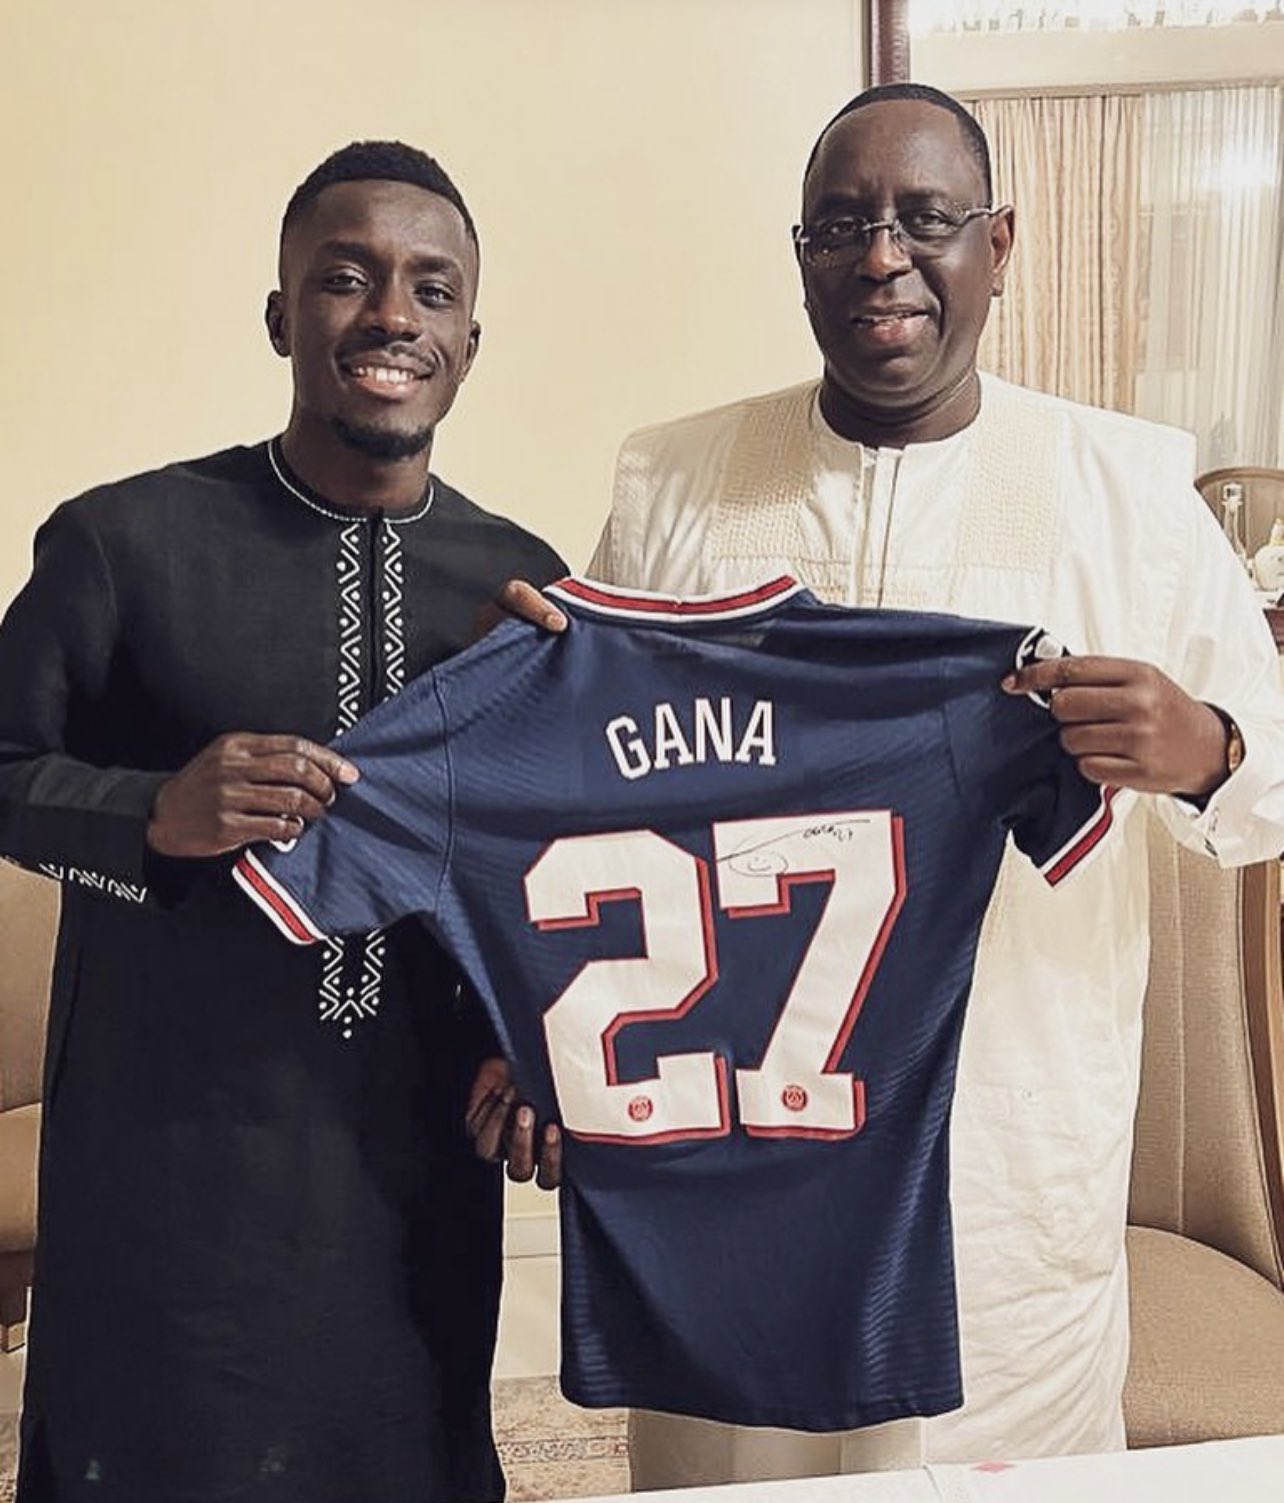 You are currently viewing Photo – Macky Sall reçoit Idrissa Gana Gueye, le champion d’Afrique